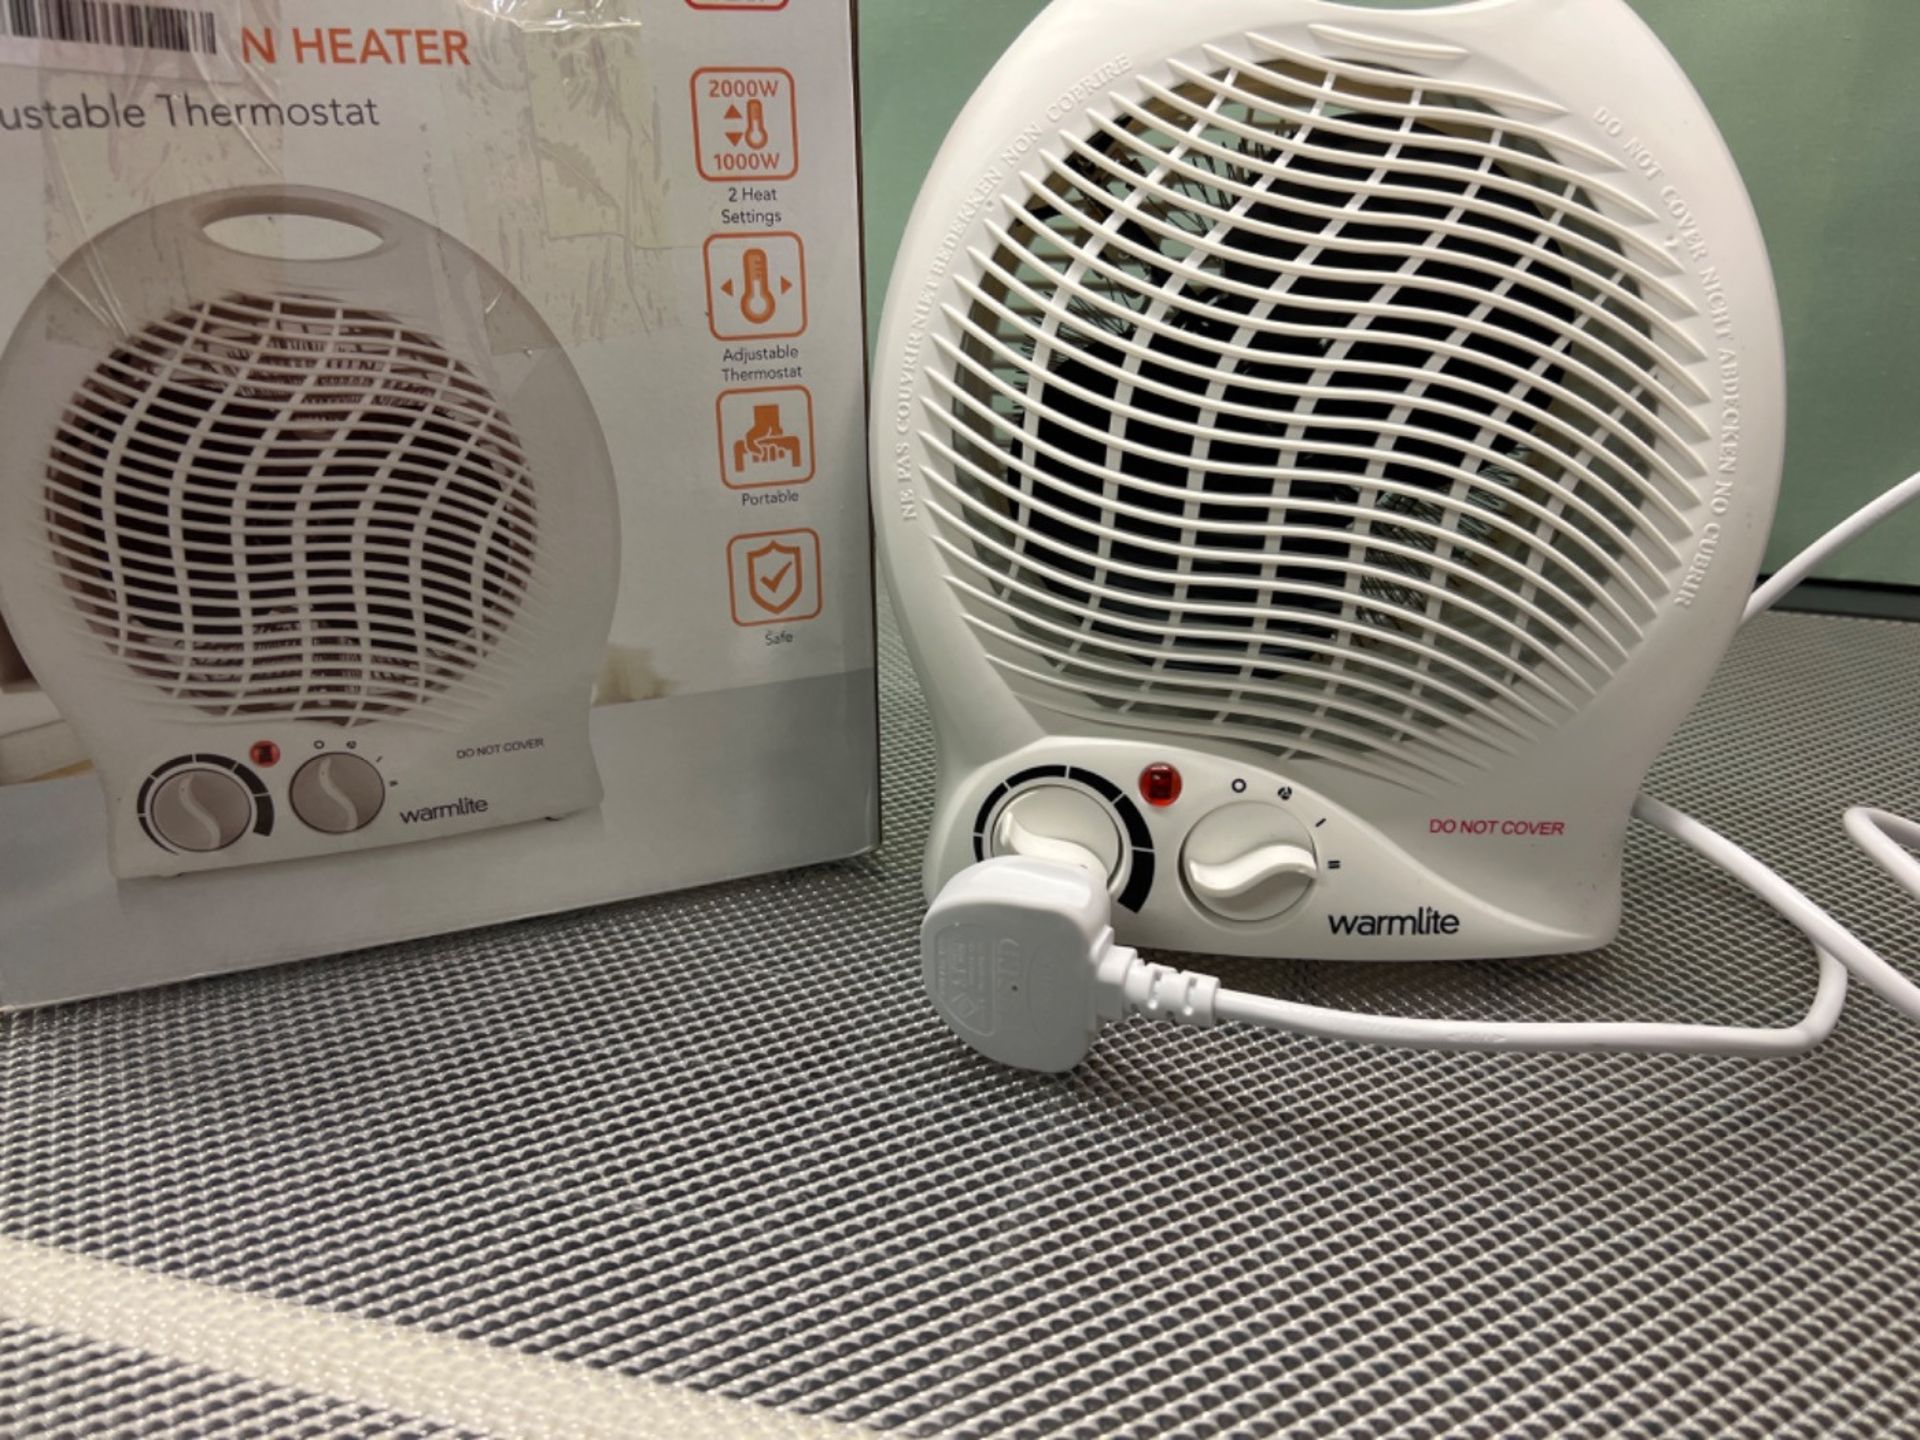 Warmlite WL44002 Thermo Fan Heater with 2 Heat Settings and Overheat Protection, 2000W, White - Image 3 of 3